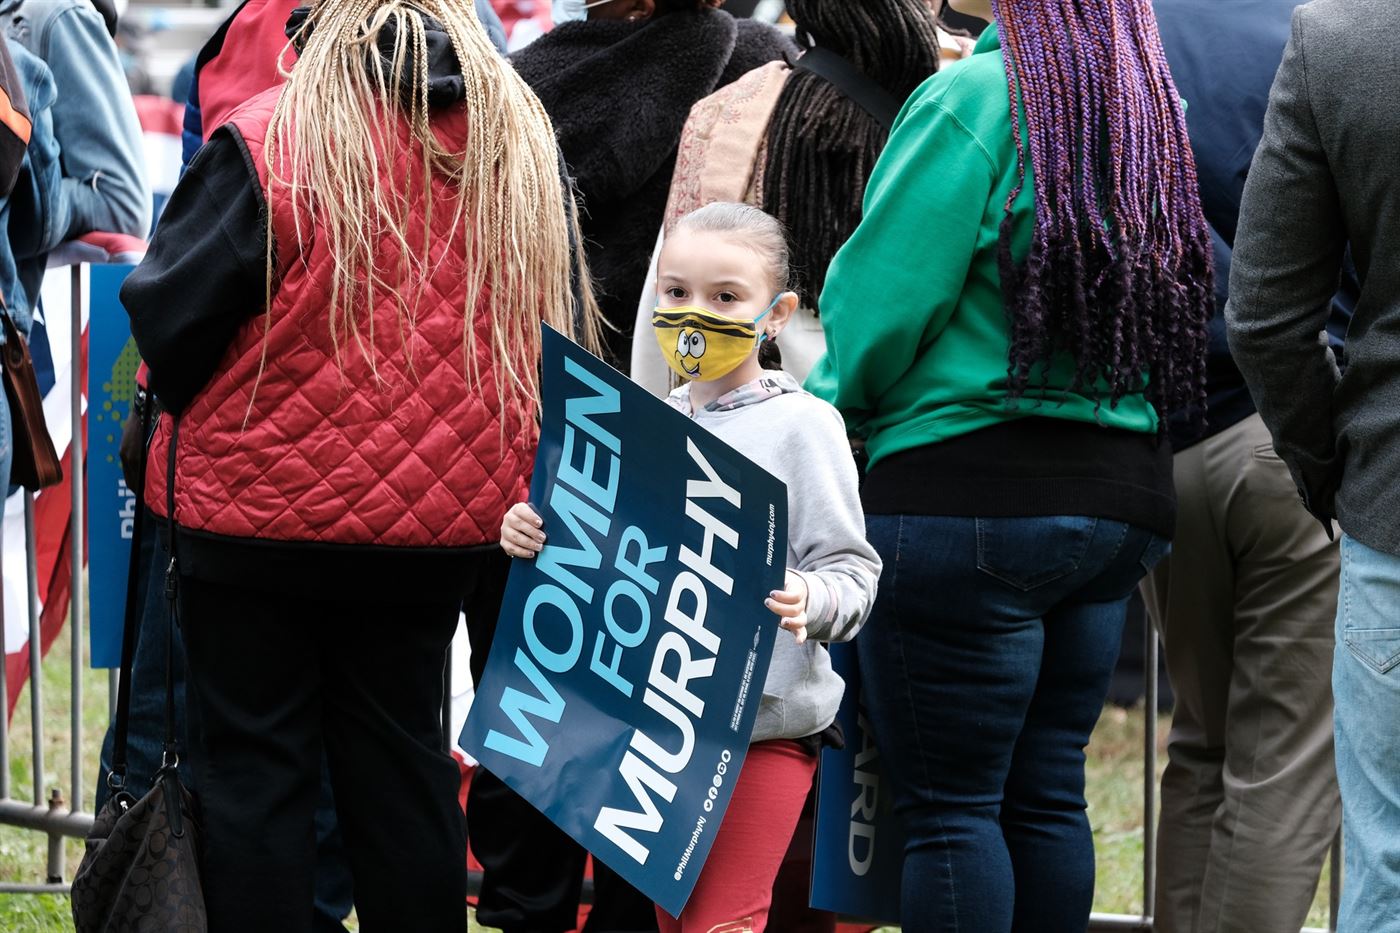 A child holding a "Women for Murphy" sign. Michael Callejas | The Montclarion